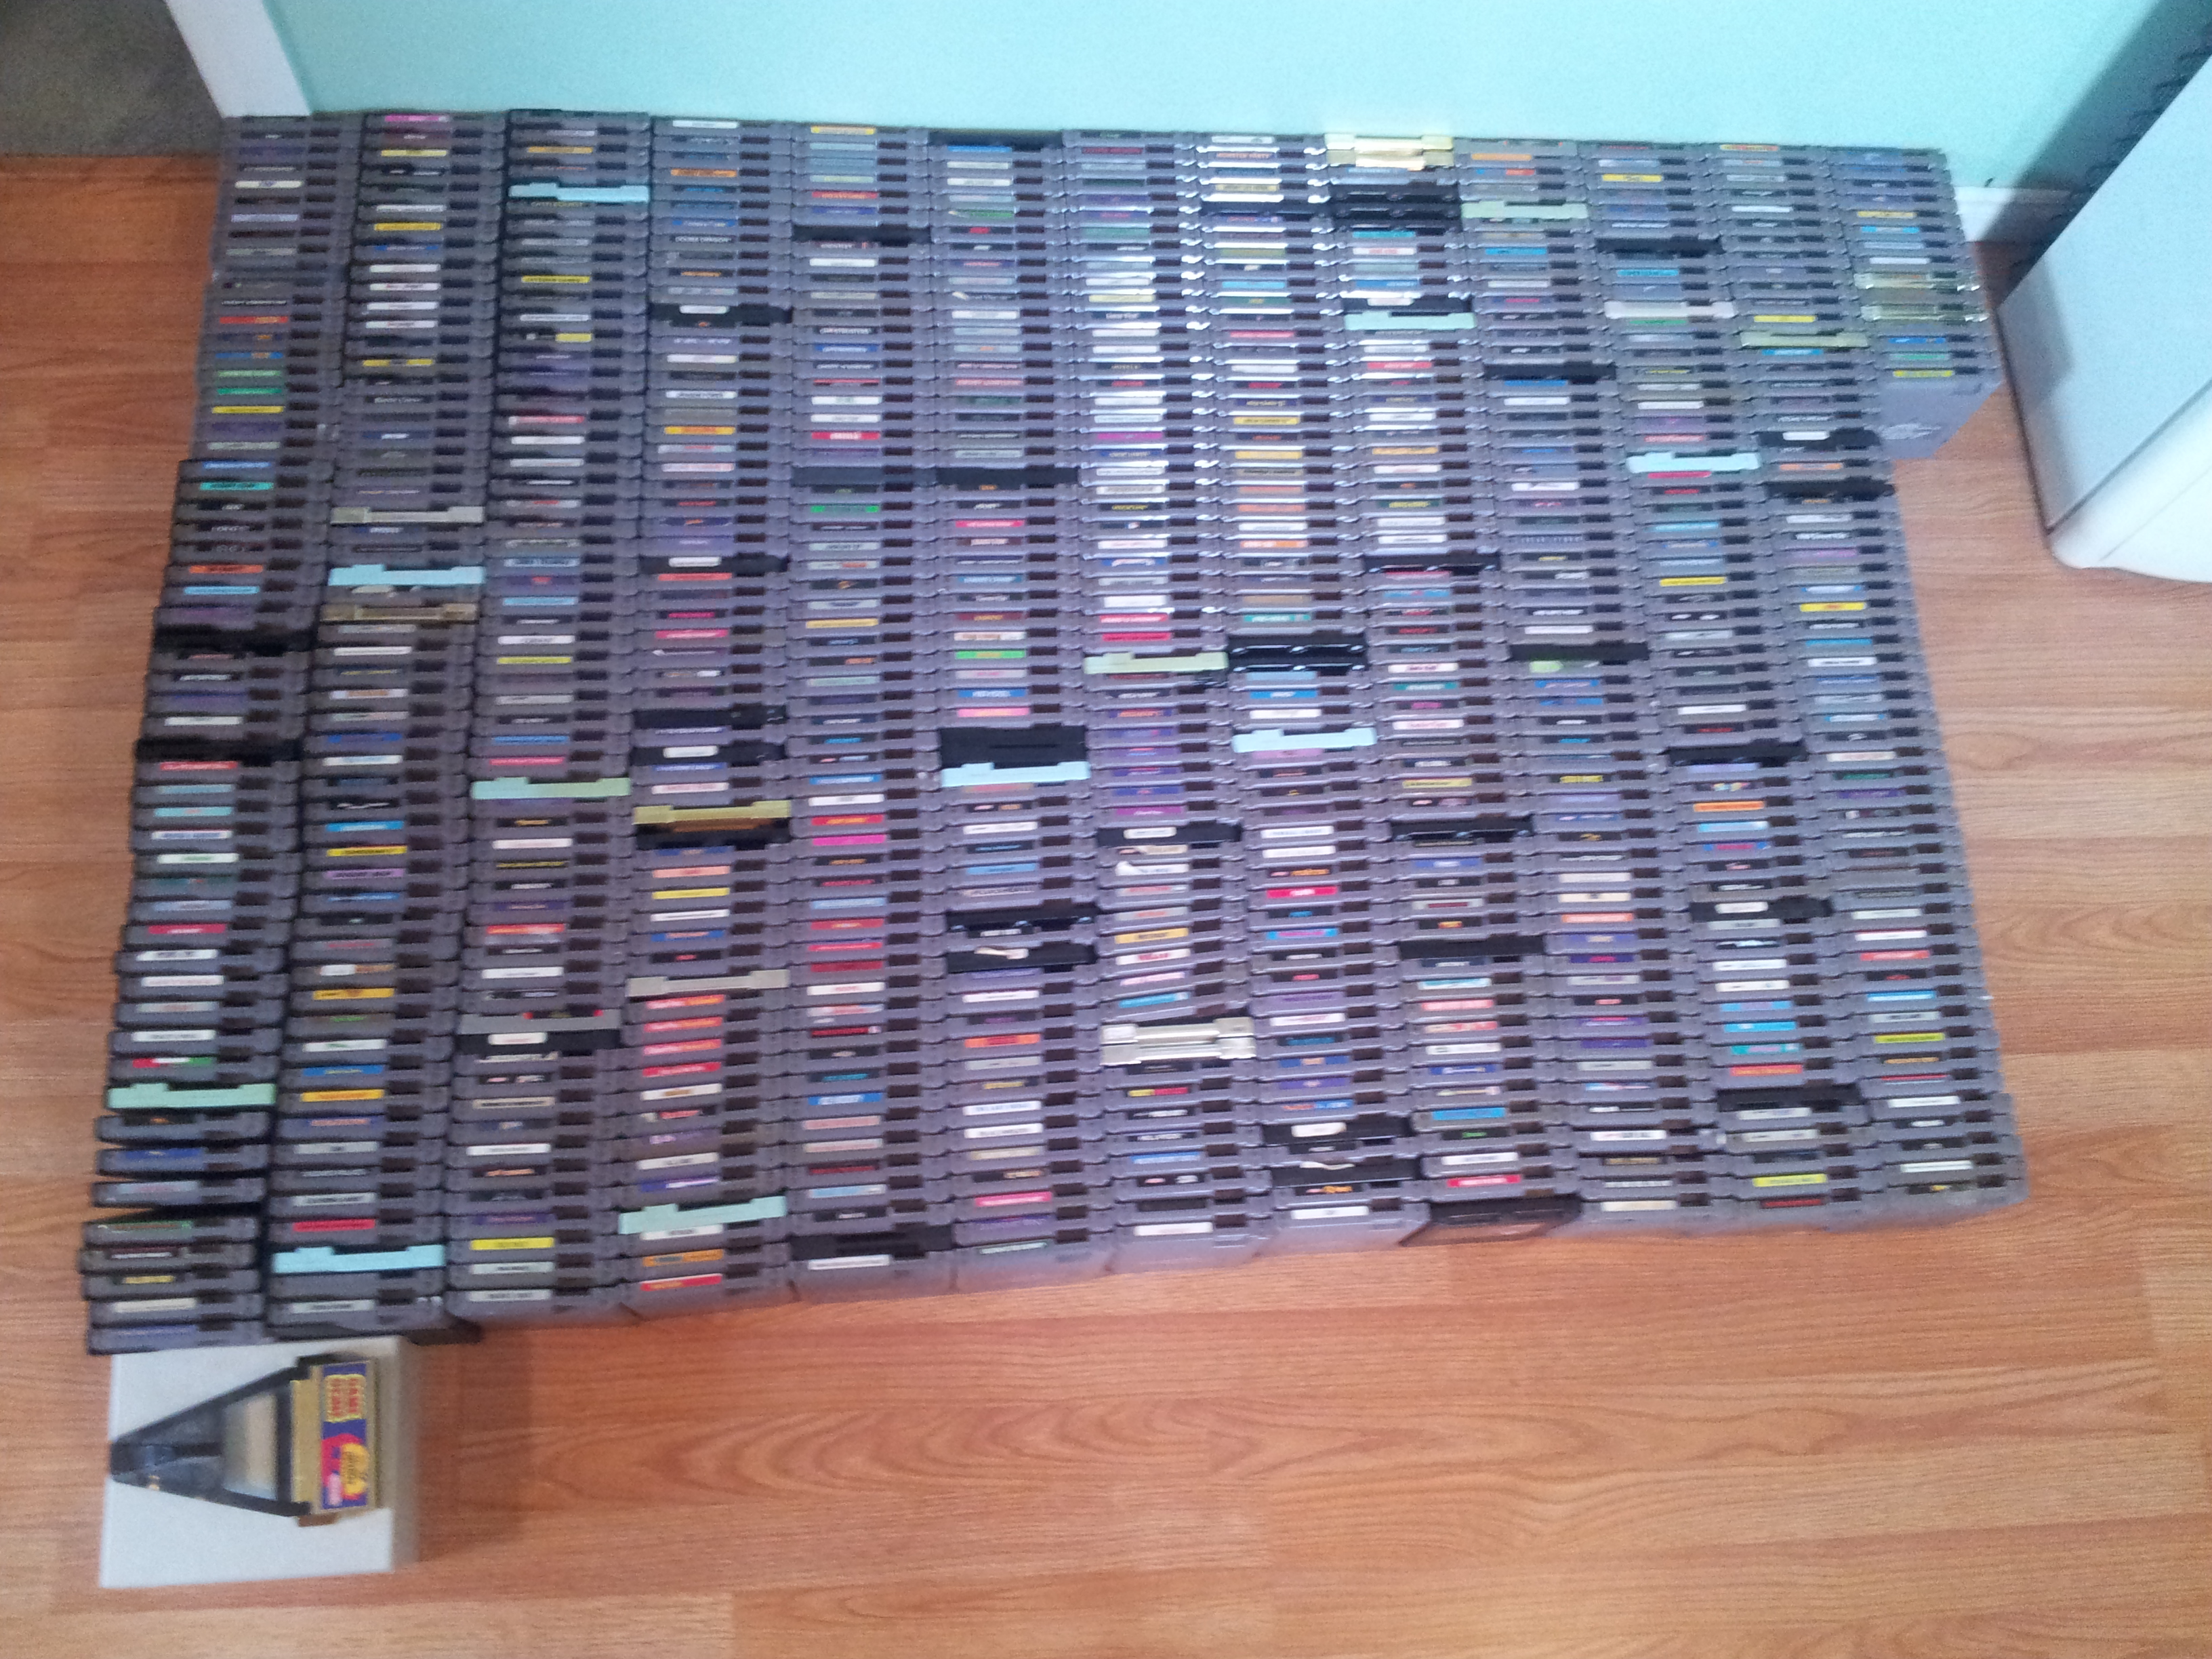 Retro Game Collection Feature: Phil Mullins